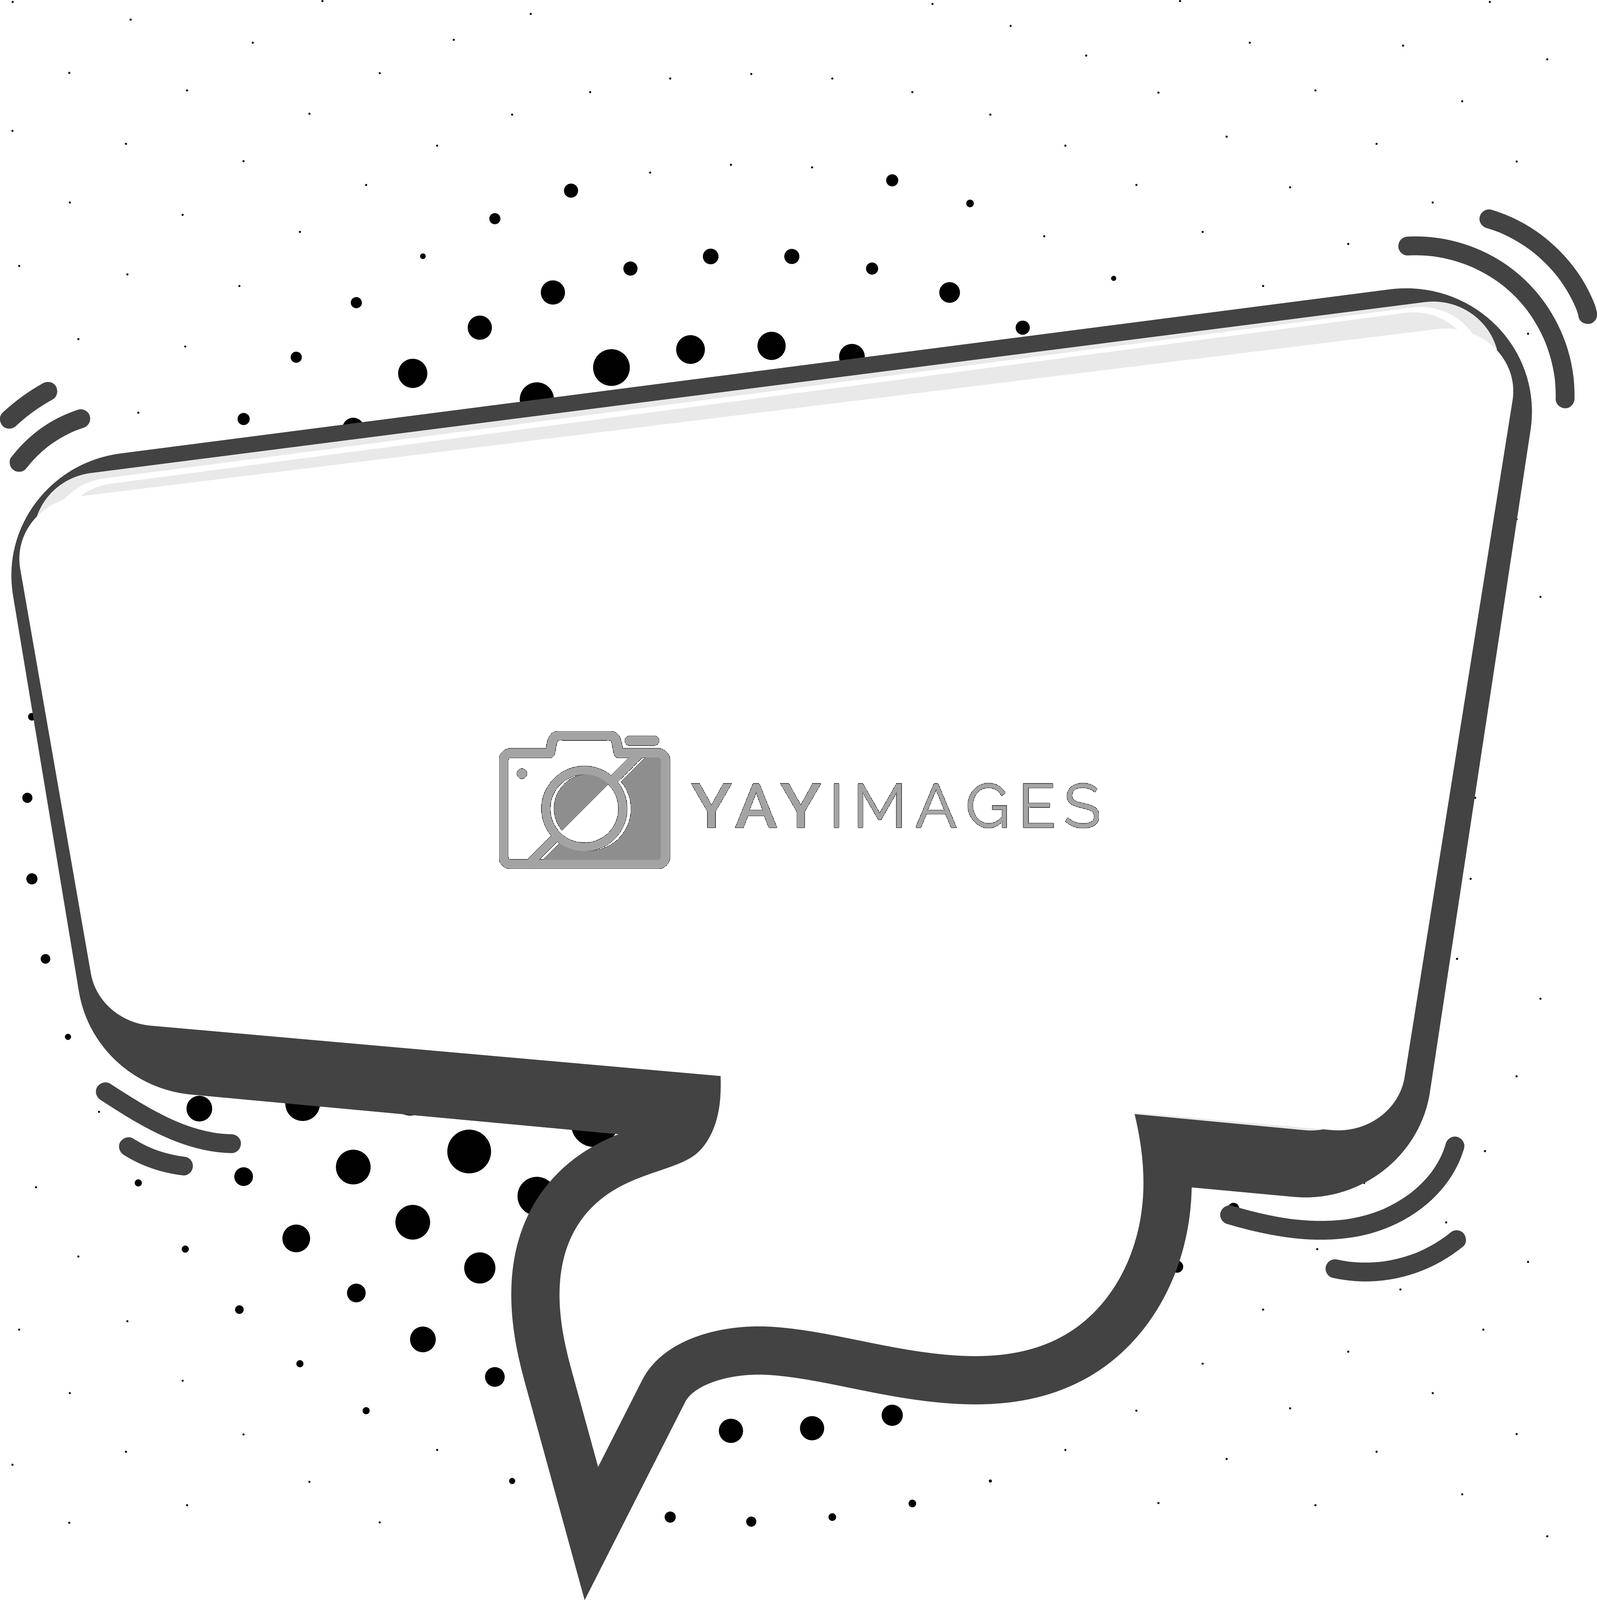 Royalty free image of Comic speech bubble template. Blank text frame by LadadikArt